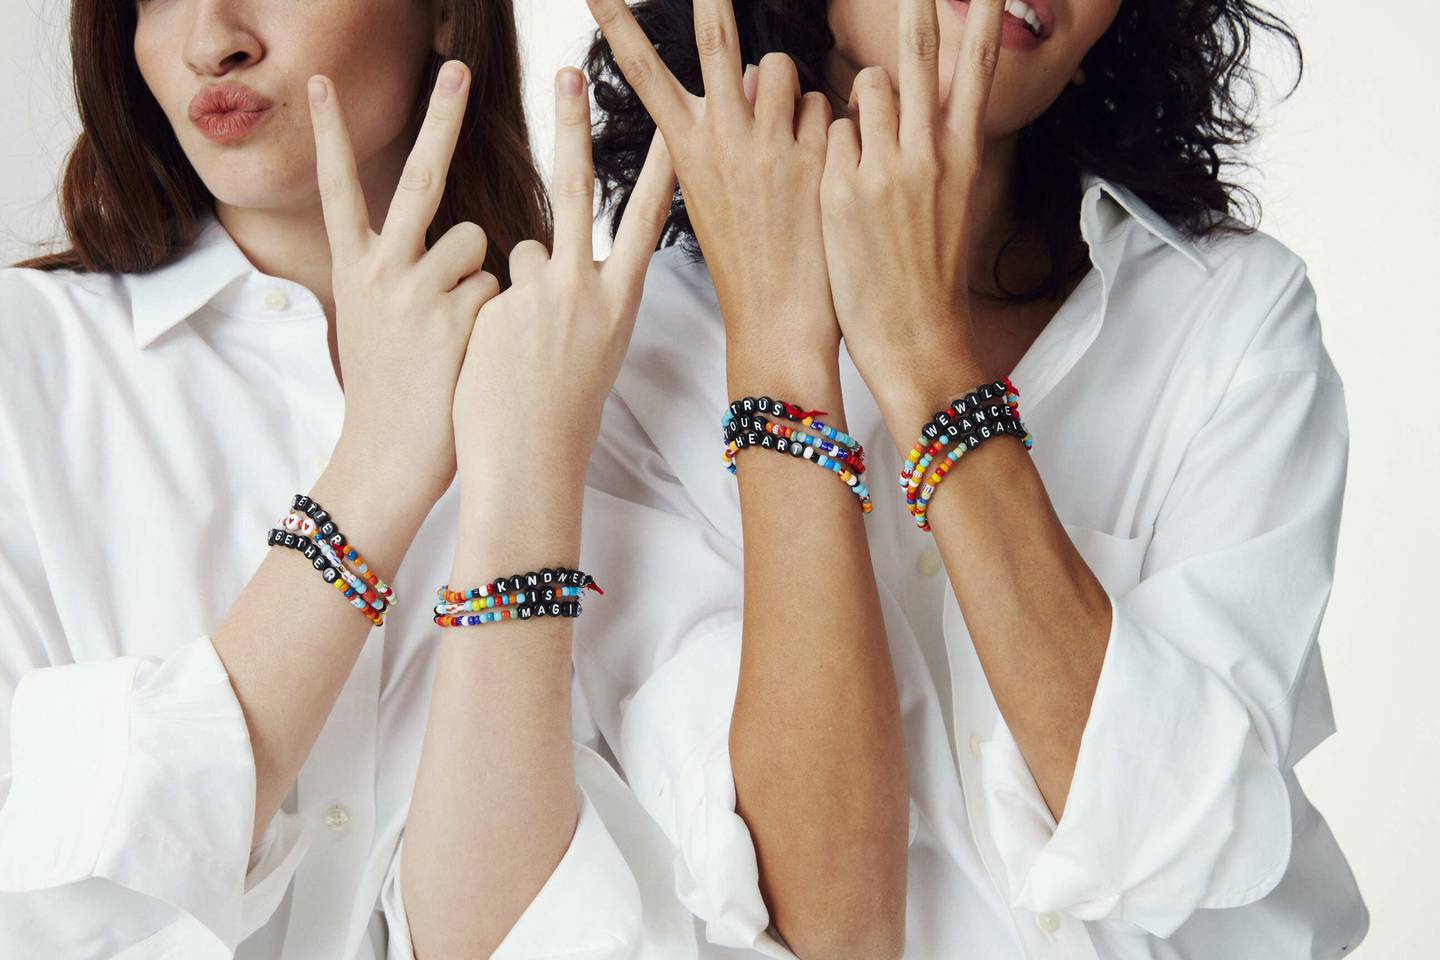 Designer Roxanne Assoulin saw sales double in 2020, thanks to the "camp jewellery" trend.